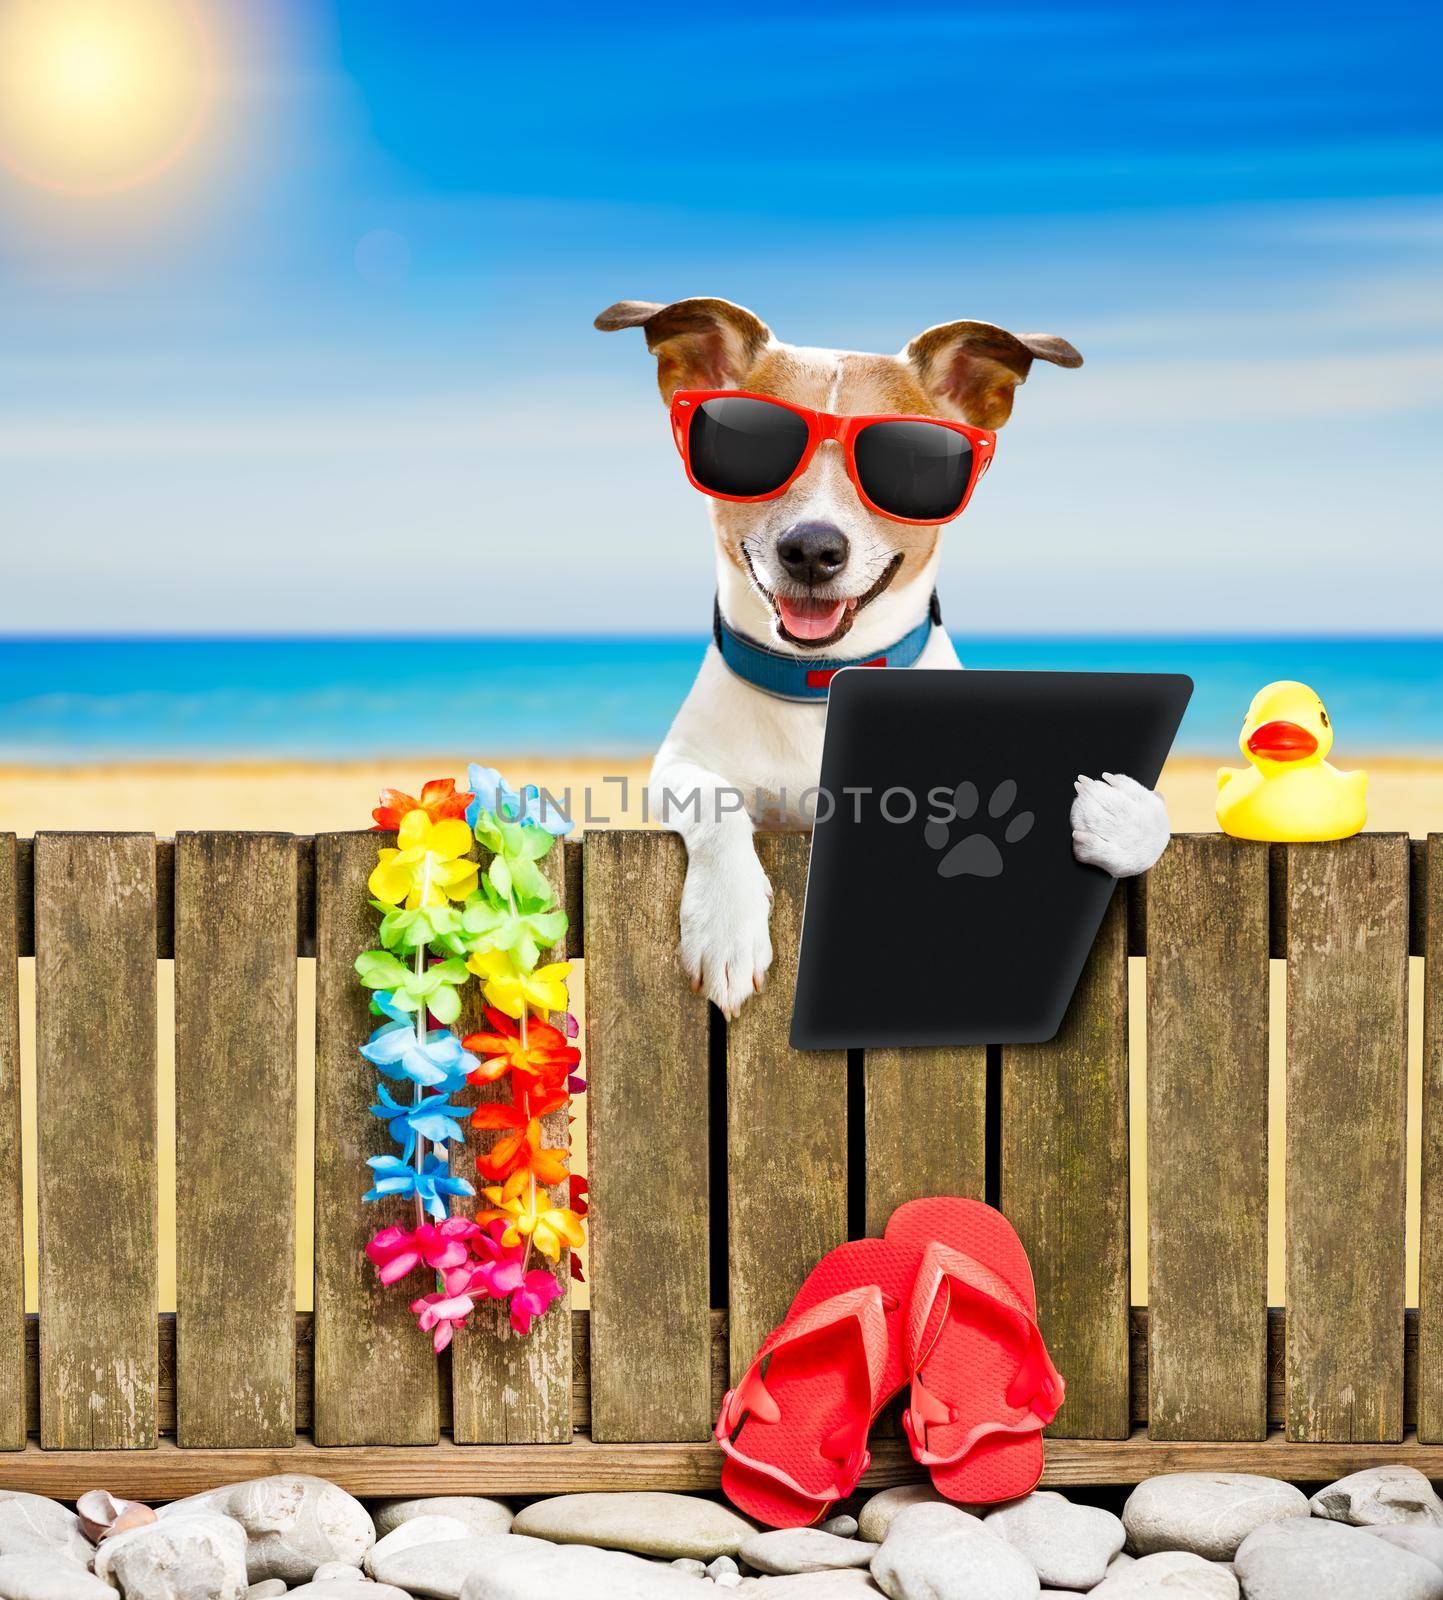 jack russel dog resting and relaxing on a wall or fence at the  beach  ocean shore, on summer vacation holidays, reading a tablet ebook  digital screen